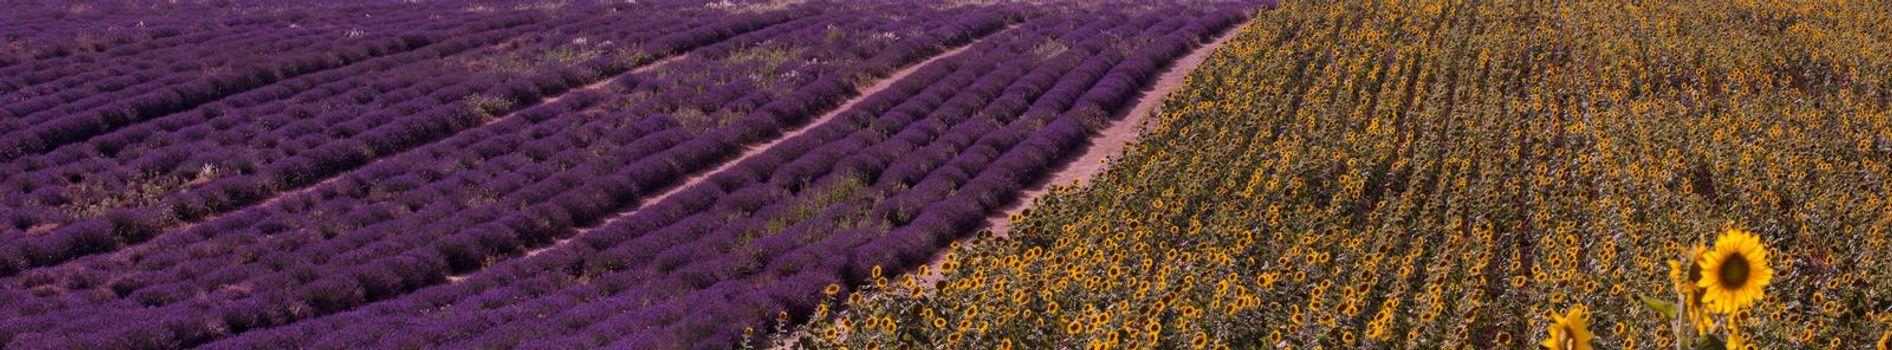 lavender and sunflower field purple aromatic flowers near valensole in provence france